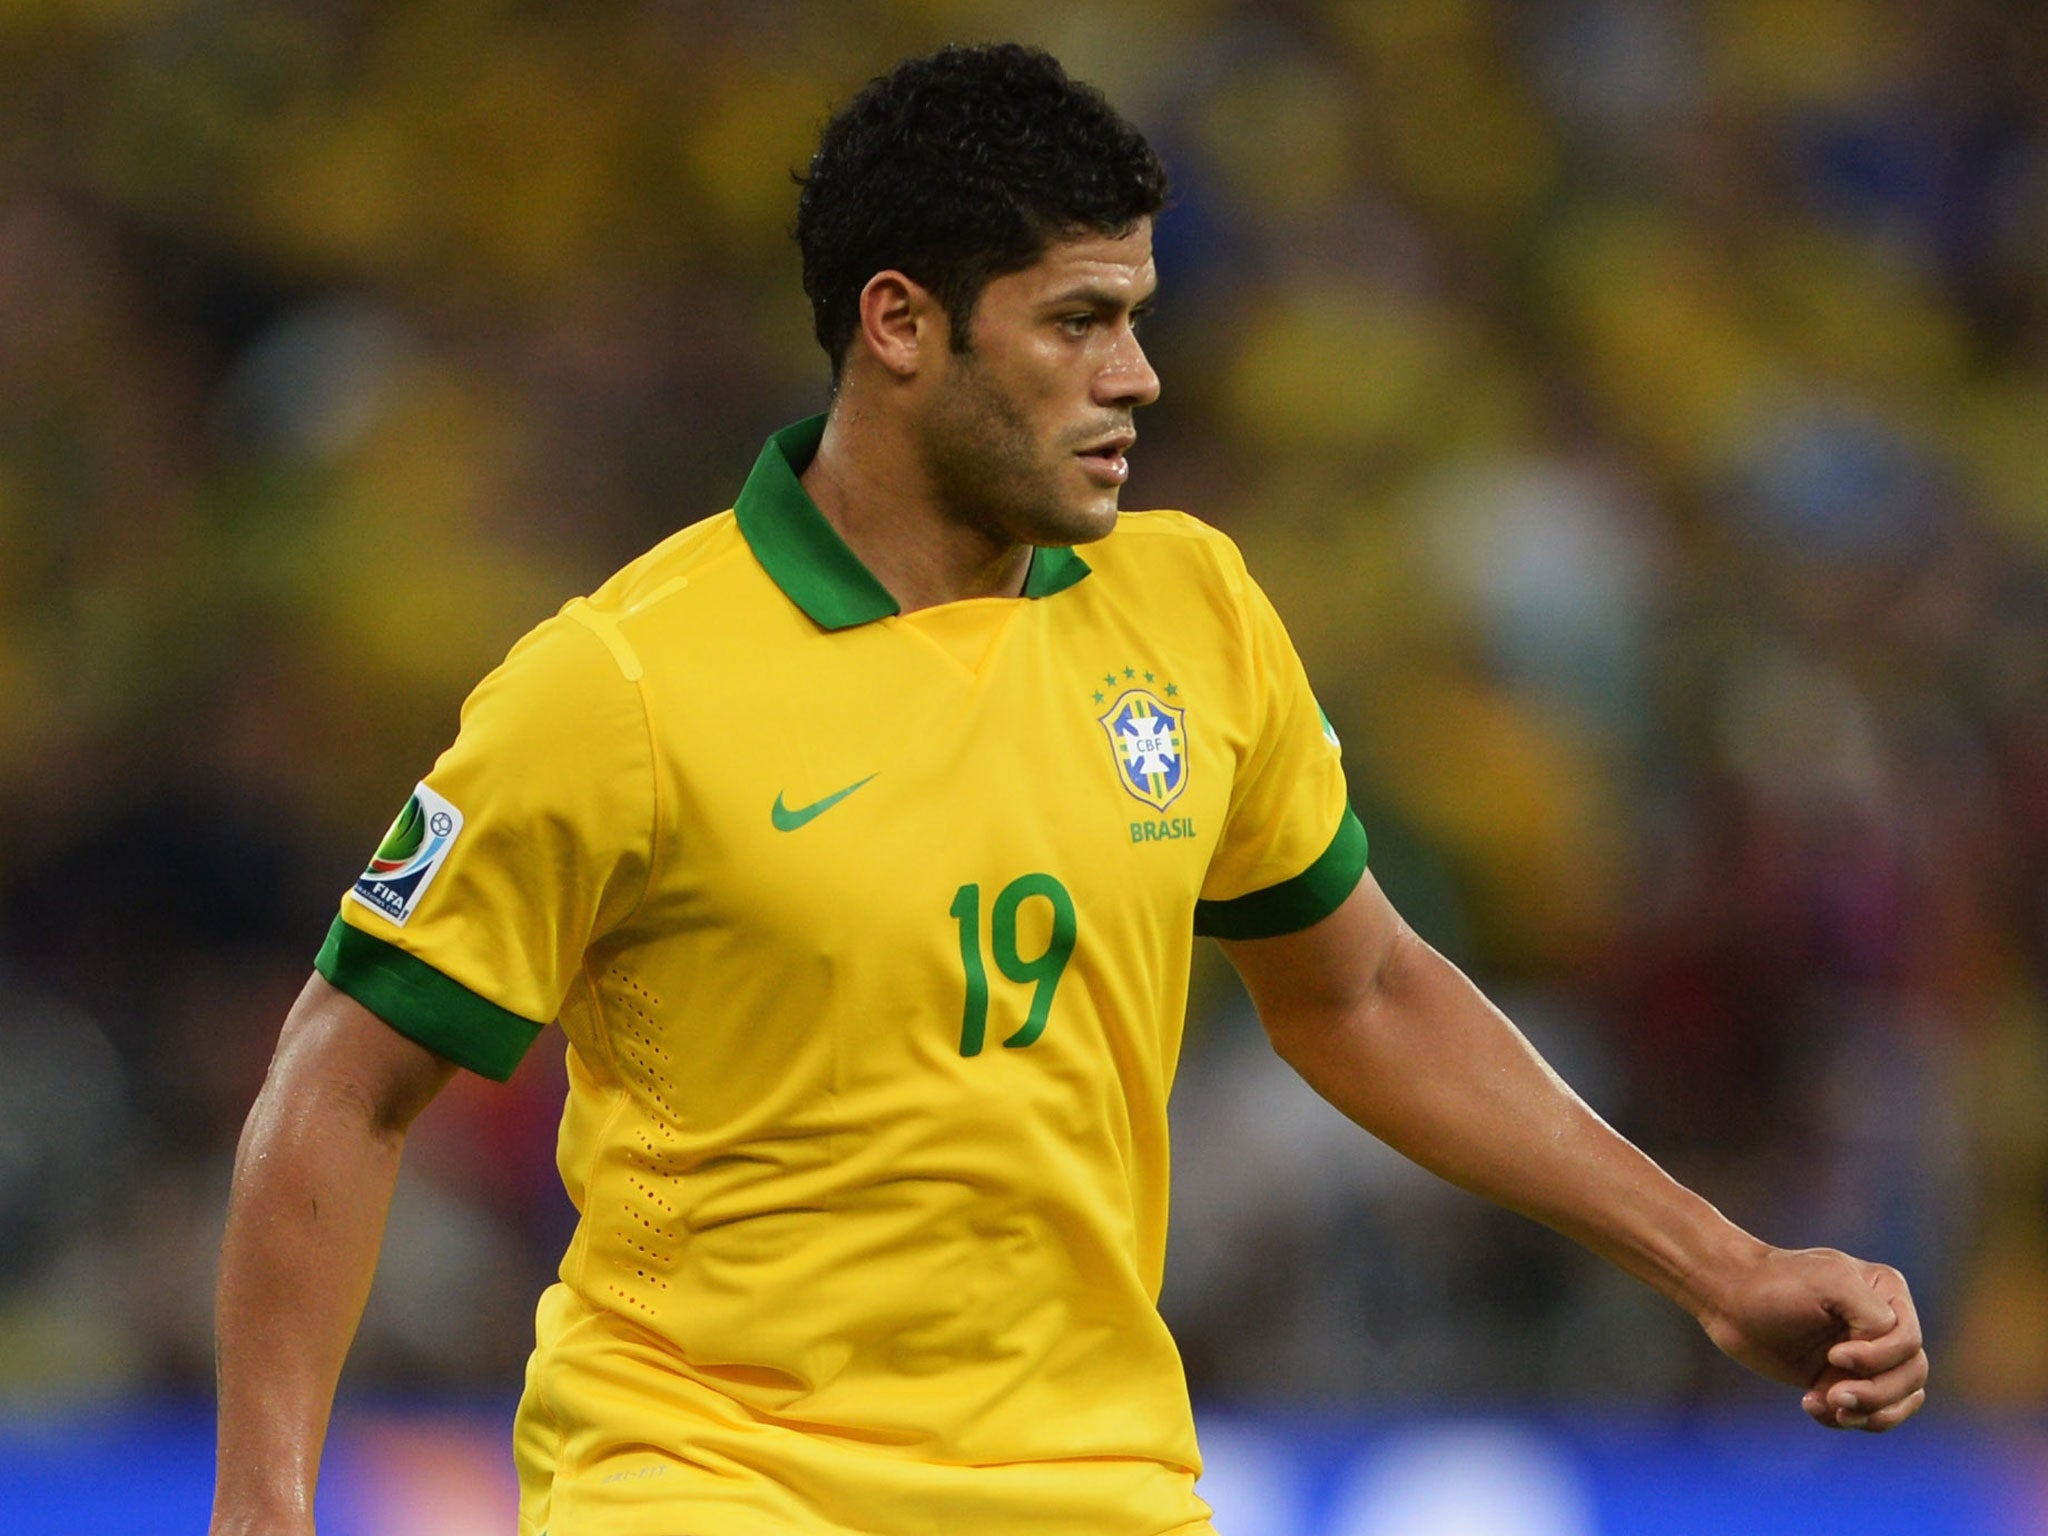 Hulk could be set for a £10m loan move to Tottenham